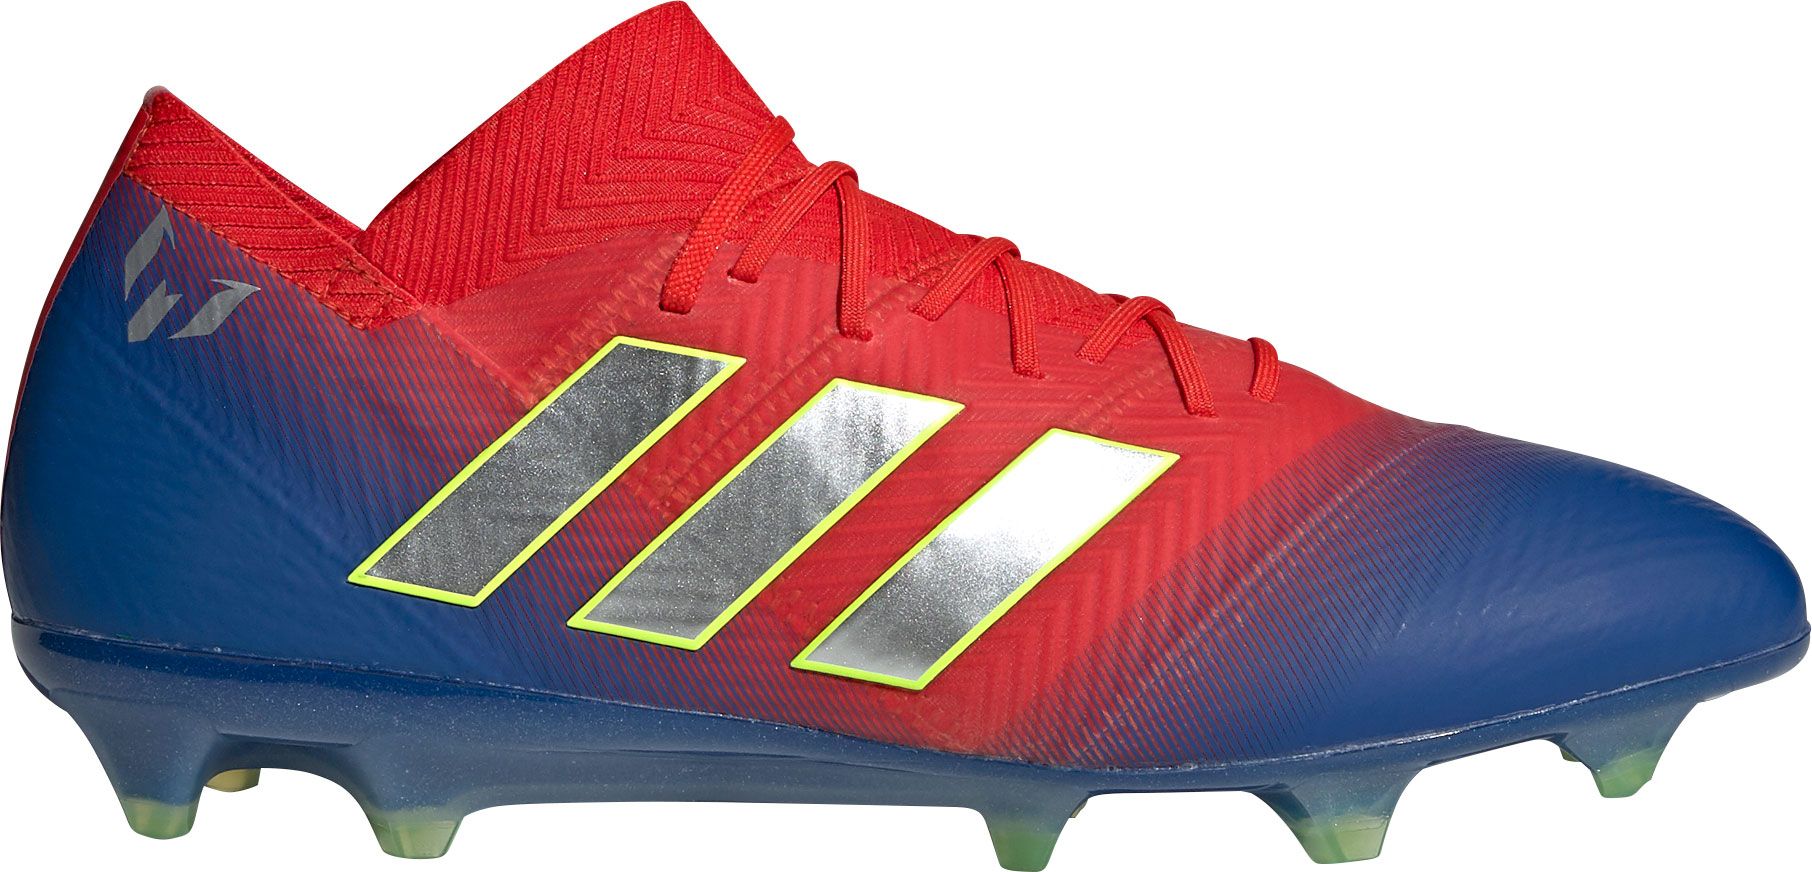 adidas soccer cleats messi